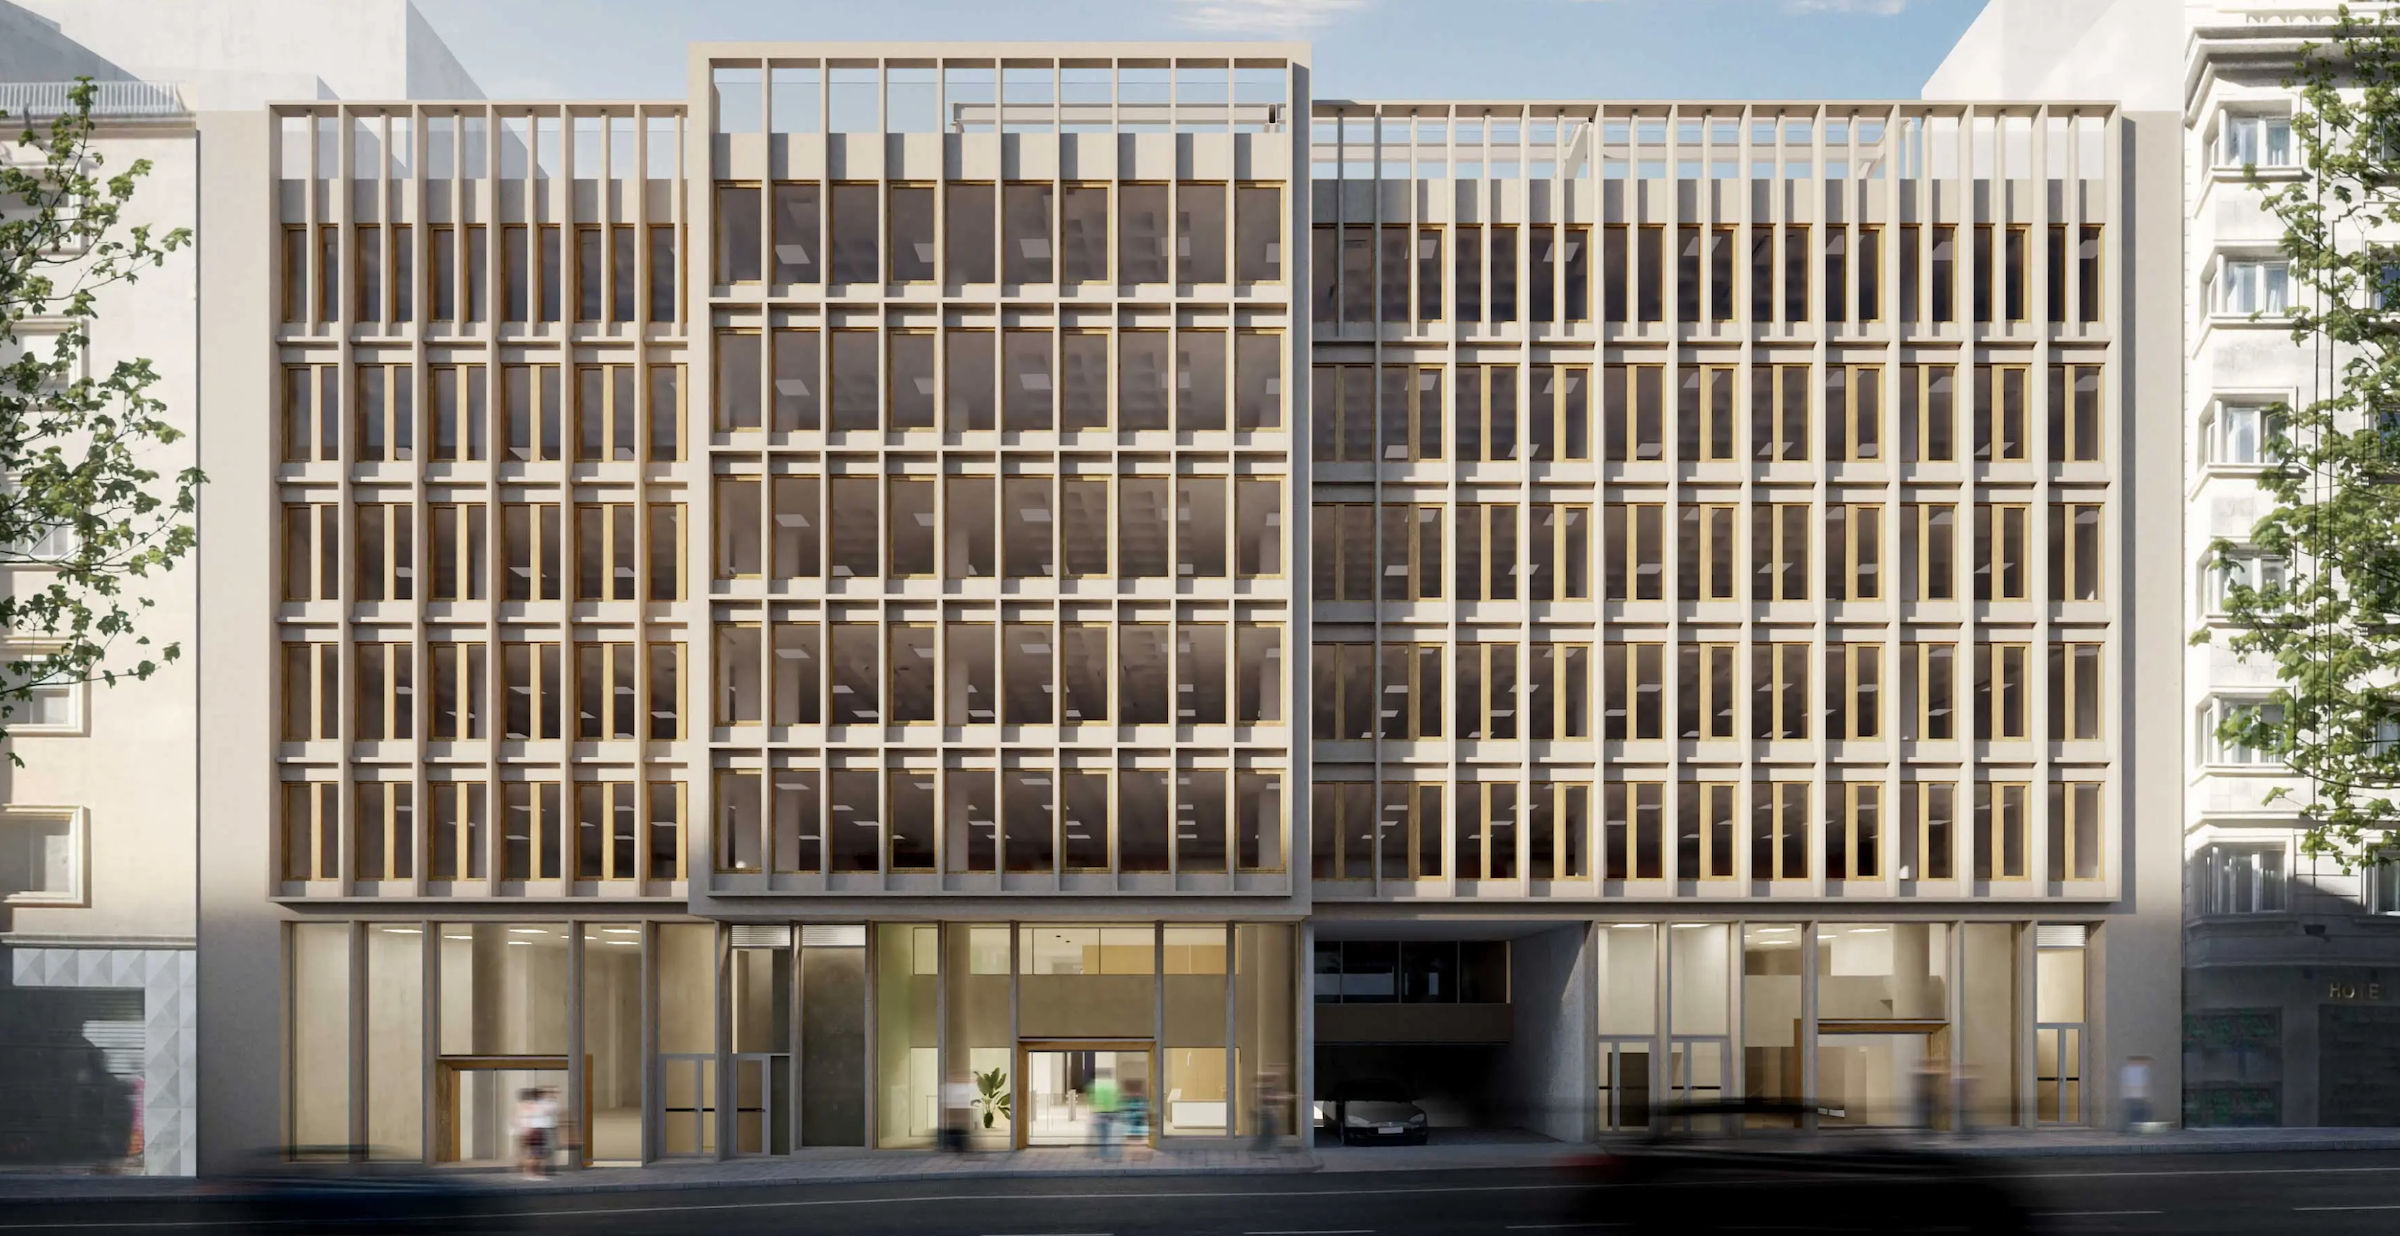 Zurich invests €15M in an office building in Barcelona city centre